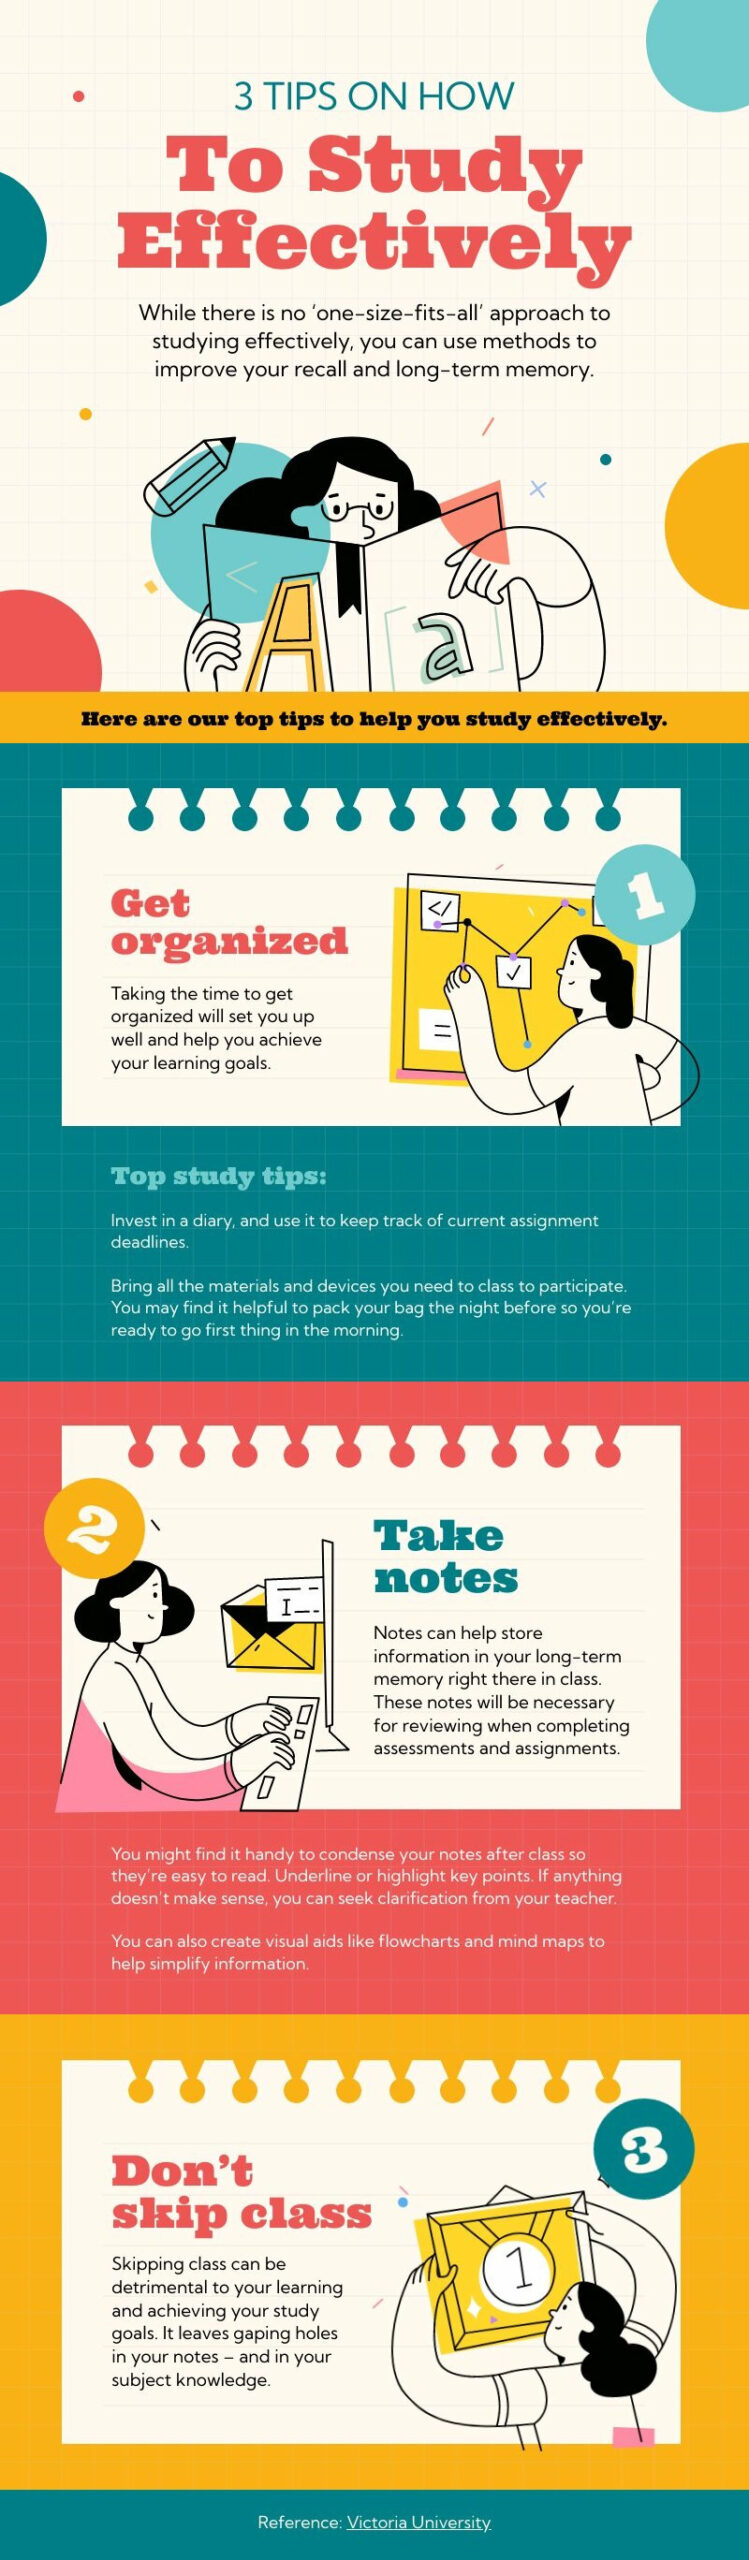 3 Secret Study Tips infographic template